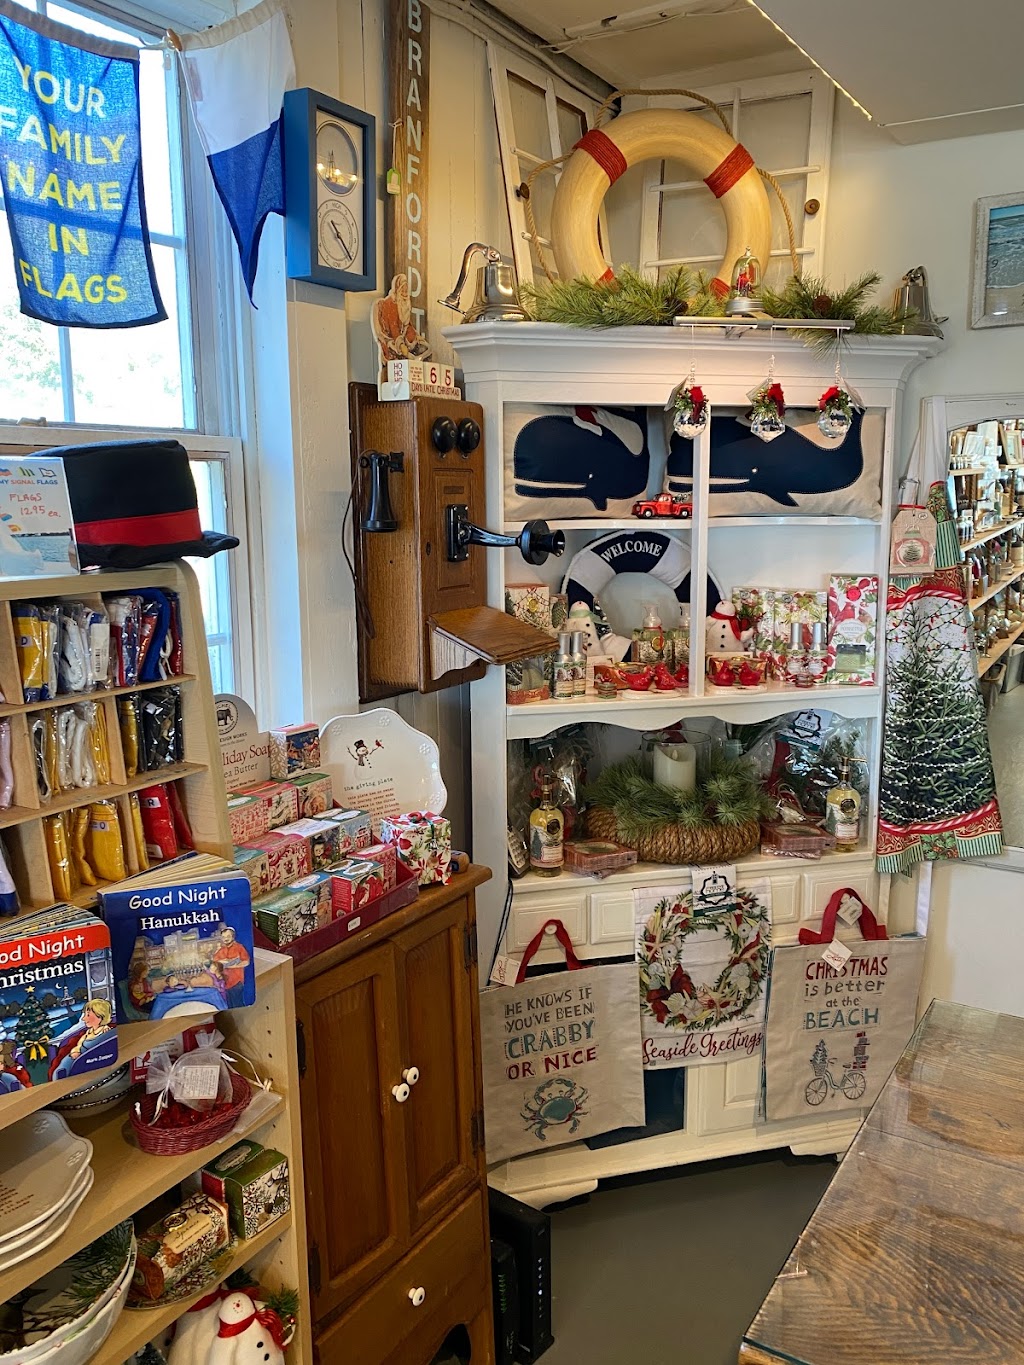 Seaside Home and Gifts | 172 Thimble Island Rd, Branford, CT 06405 | Phone: (203) 208-0521